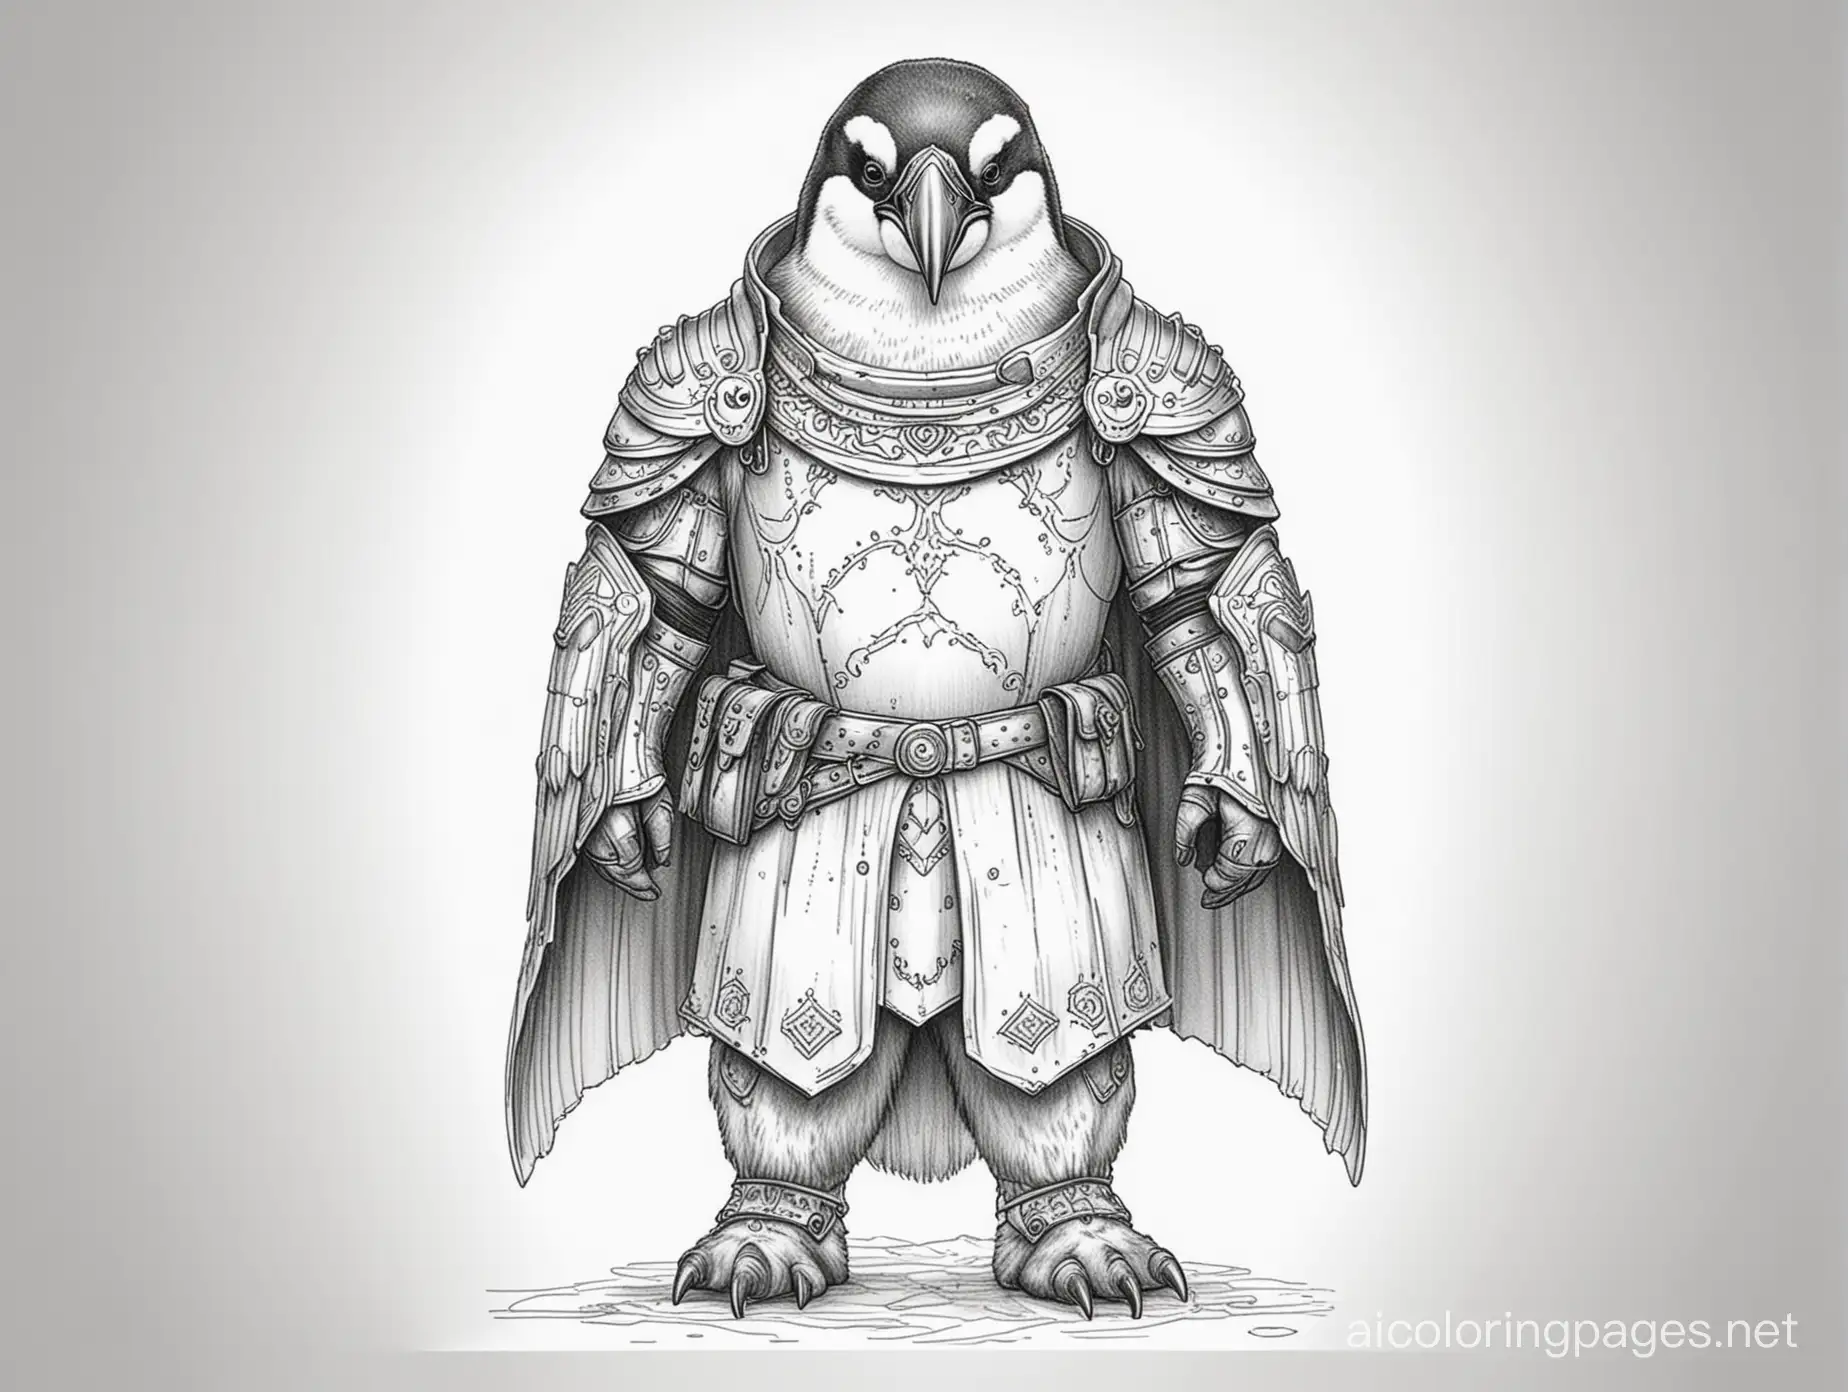 Armored-Emperor-Penguin-Knight-Coloring-Page-Black-and-White-Line-Art-for-Kids